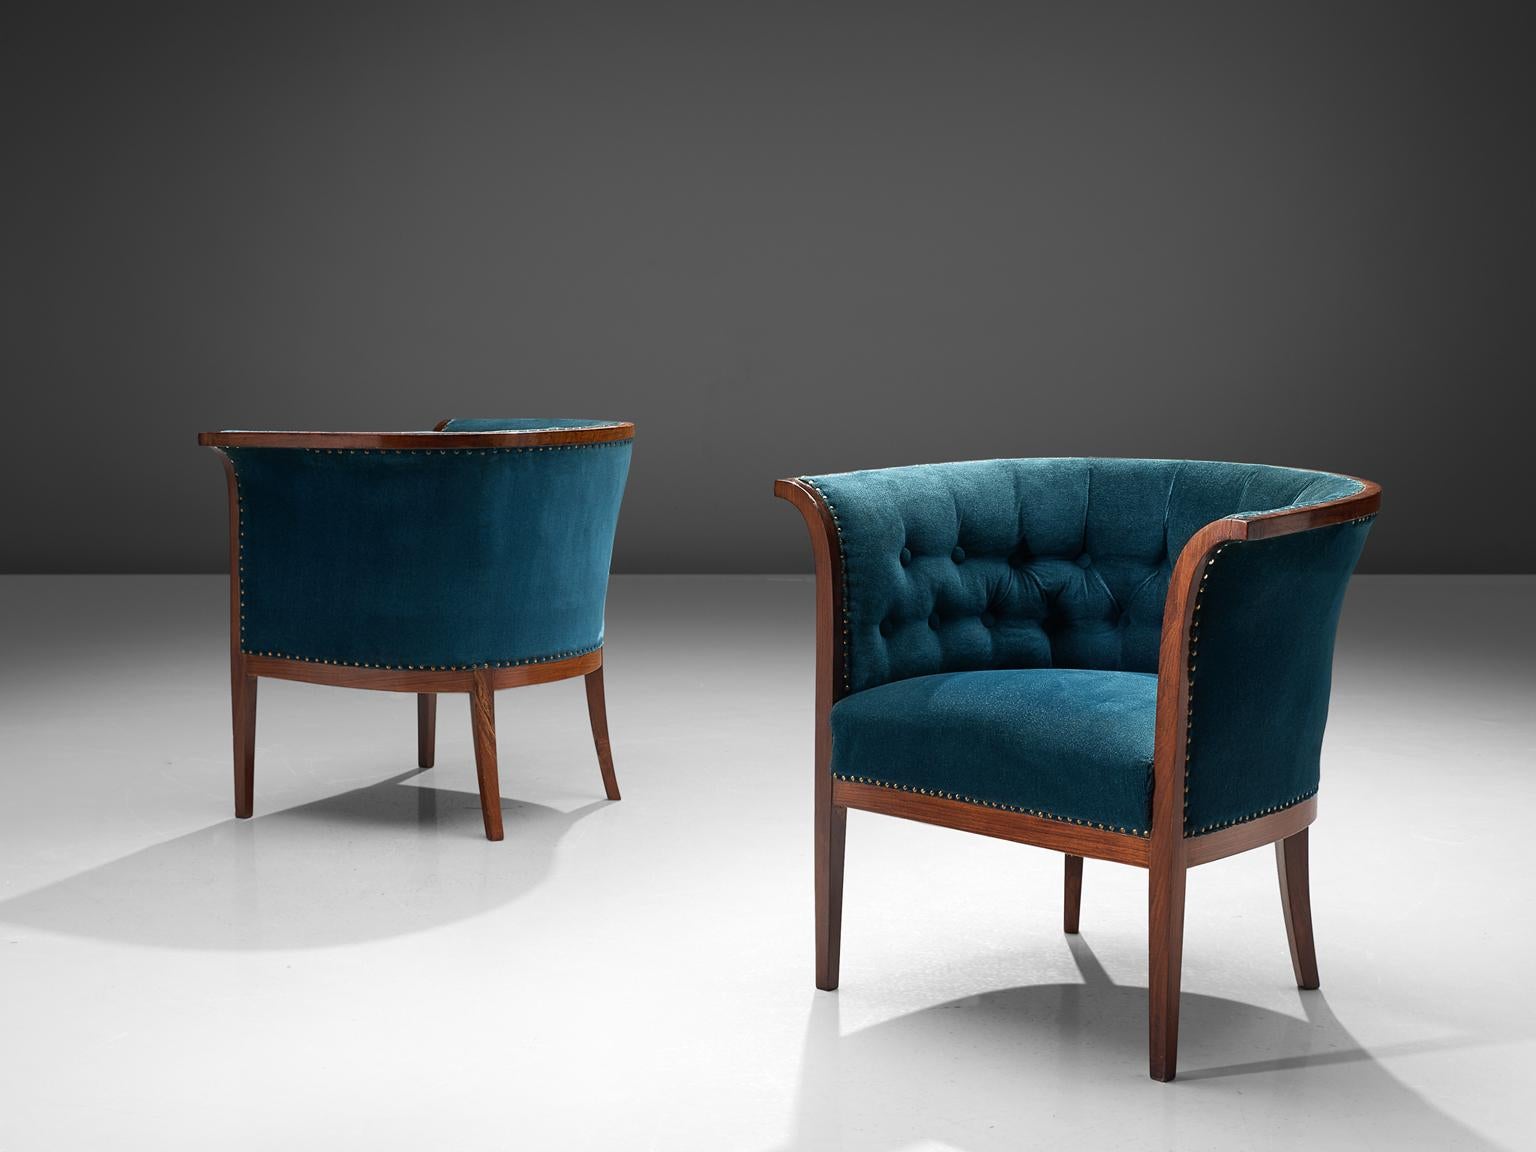 Club chairs, blue velvet upholstery, mahogany, Denmark, 1940s.

This velvet blue Danish sofa features a backrest that is tufted and the seat is executed in one piece. The seat is thick and comfortable. The defining features of this set piece are